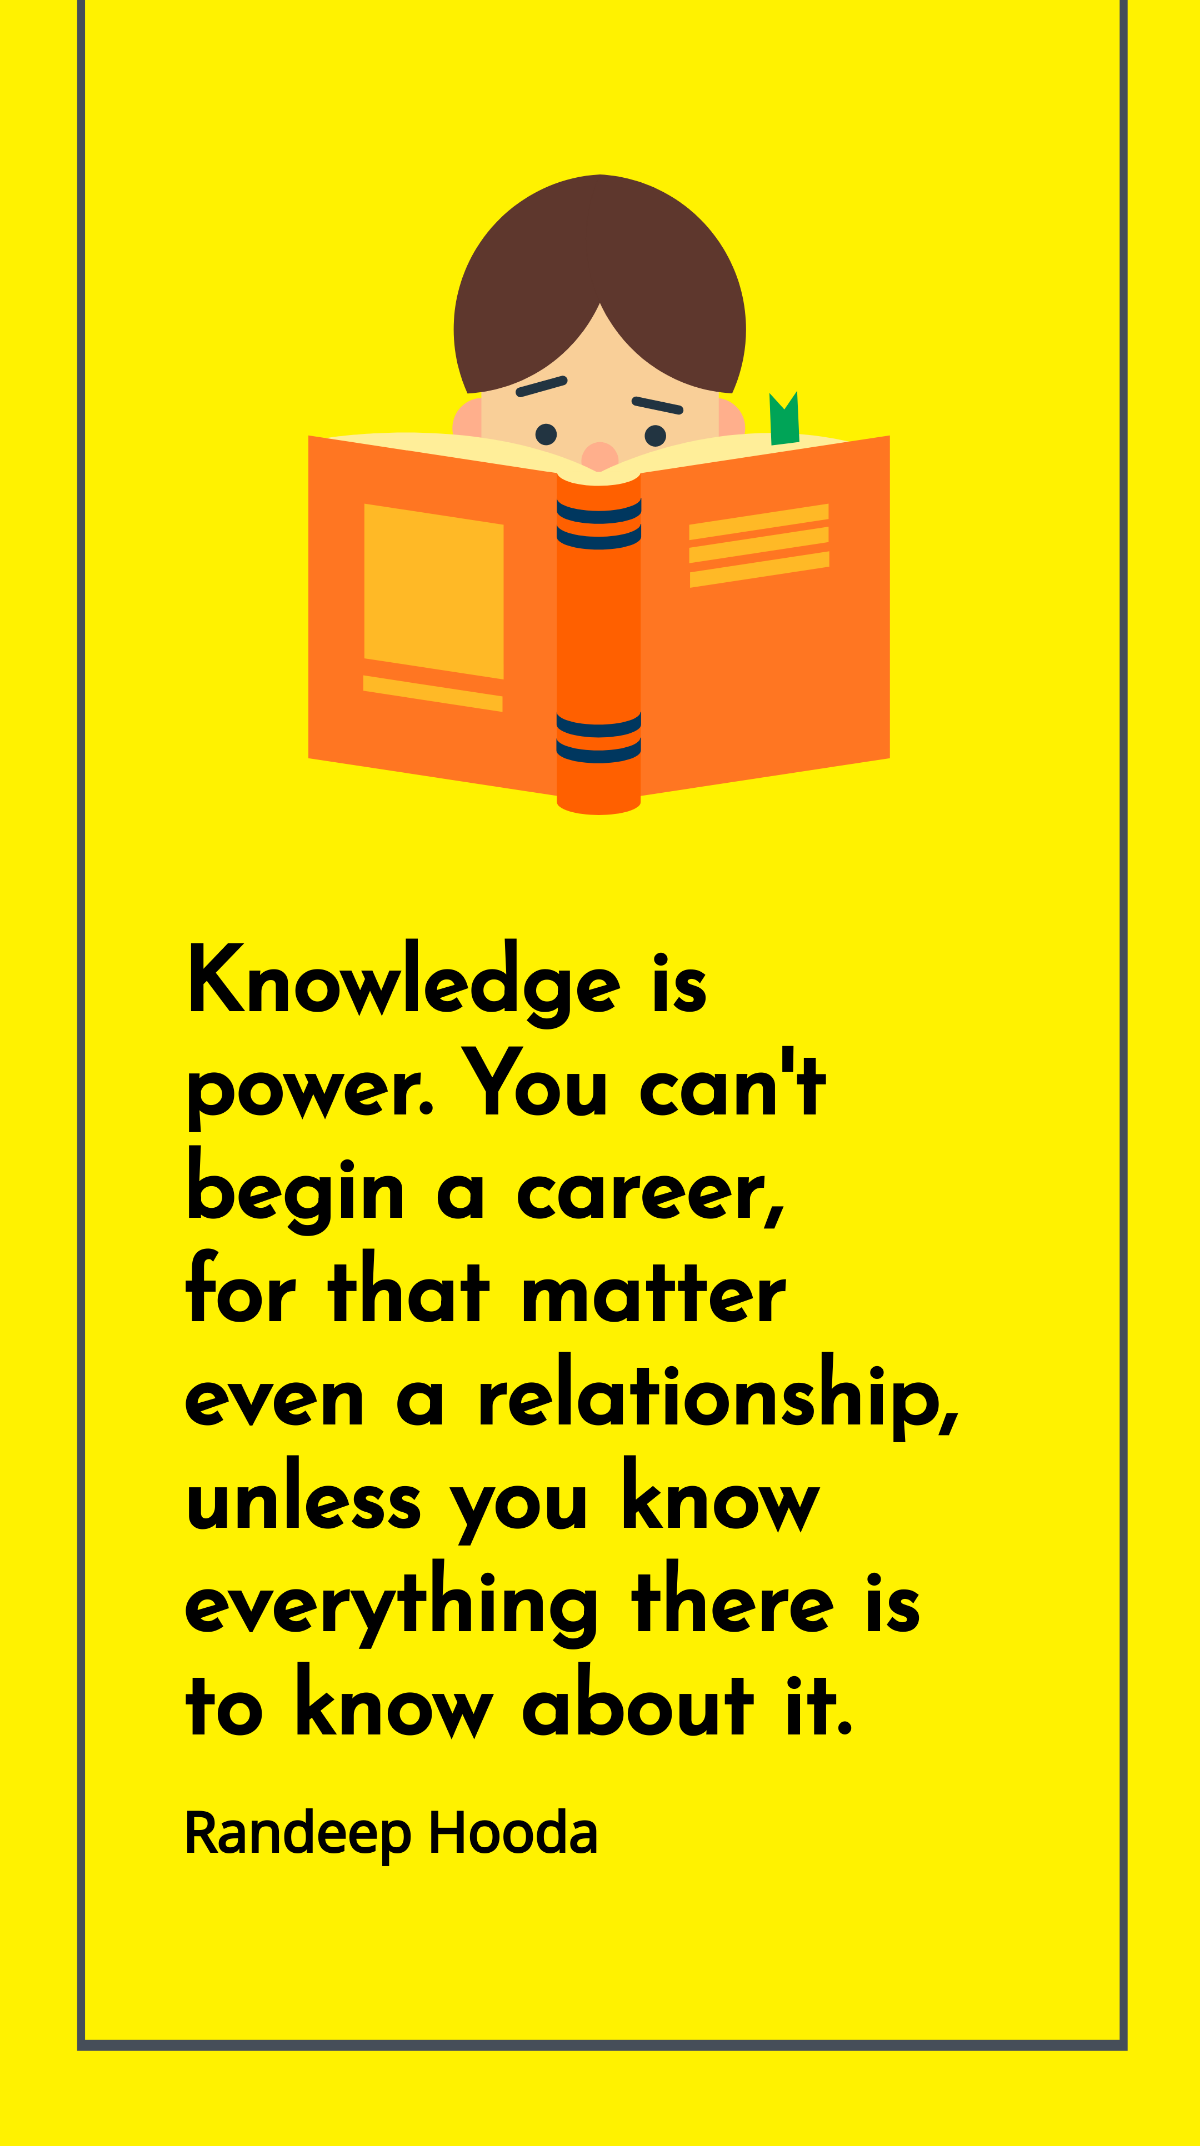 Randeep Hooda - Knowledge is power. You can't begin a career, for that matter even a relationship, unless you know everything there is to know about it. Template